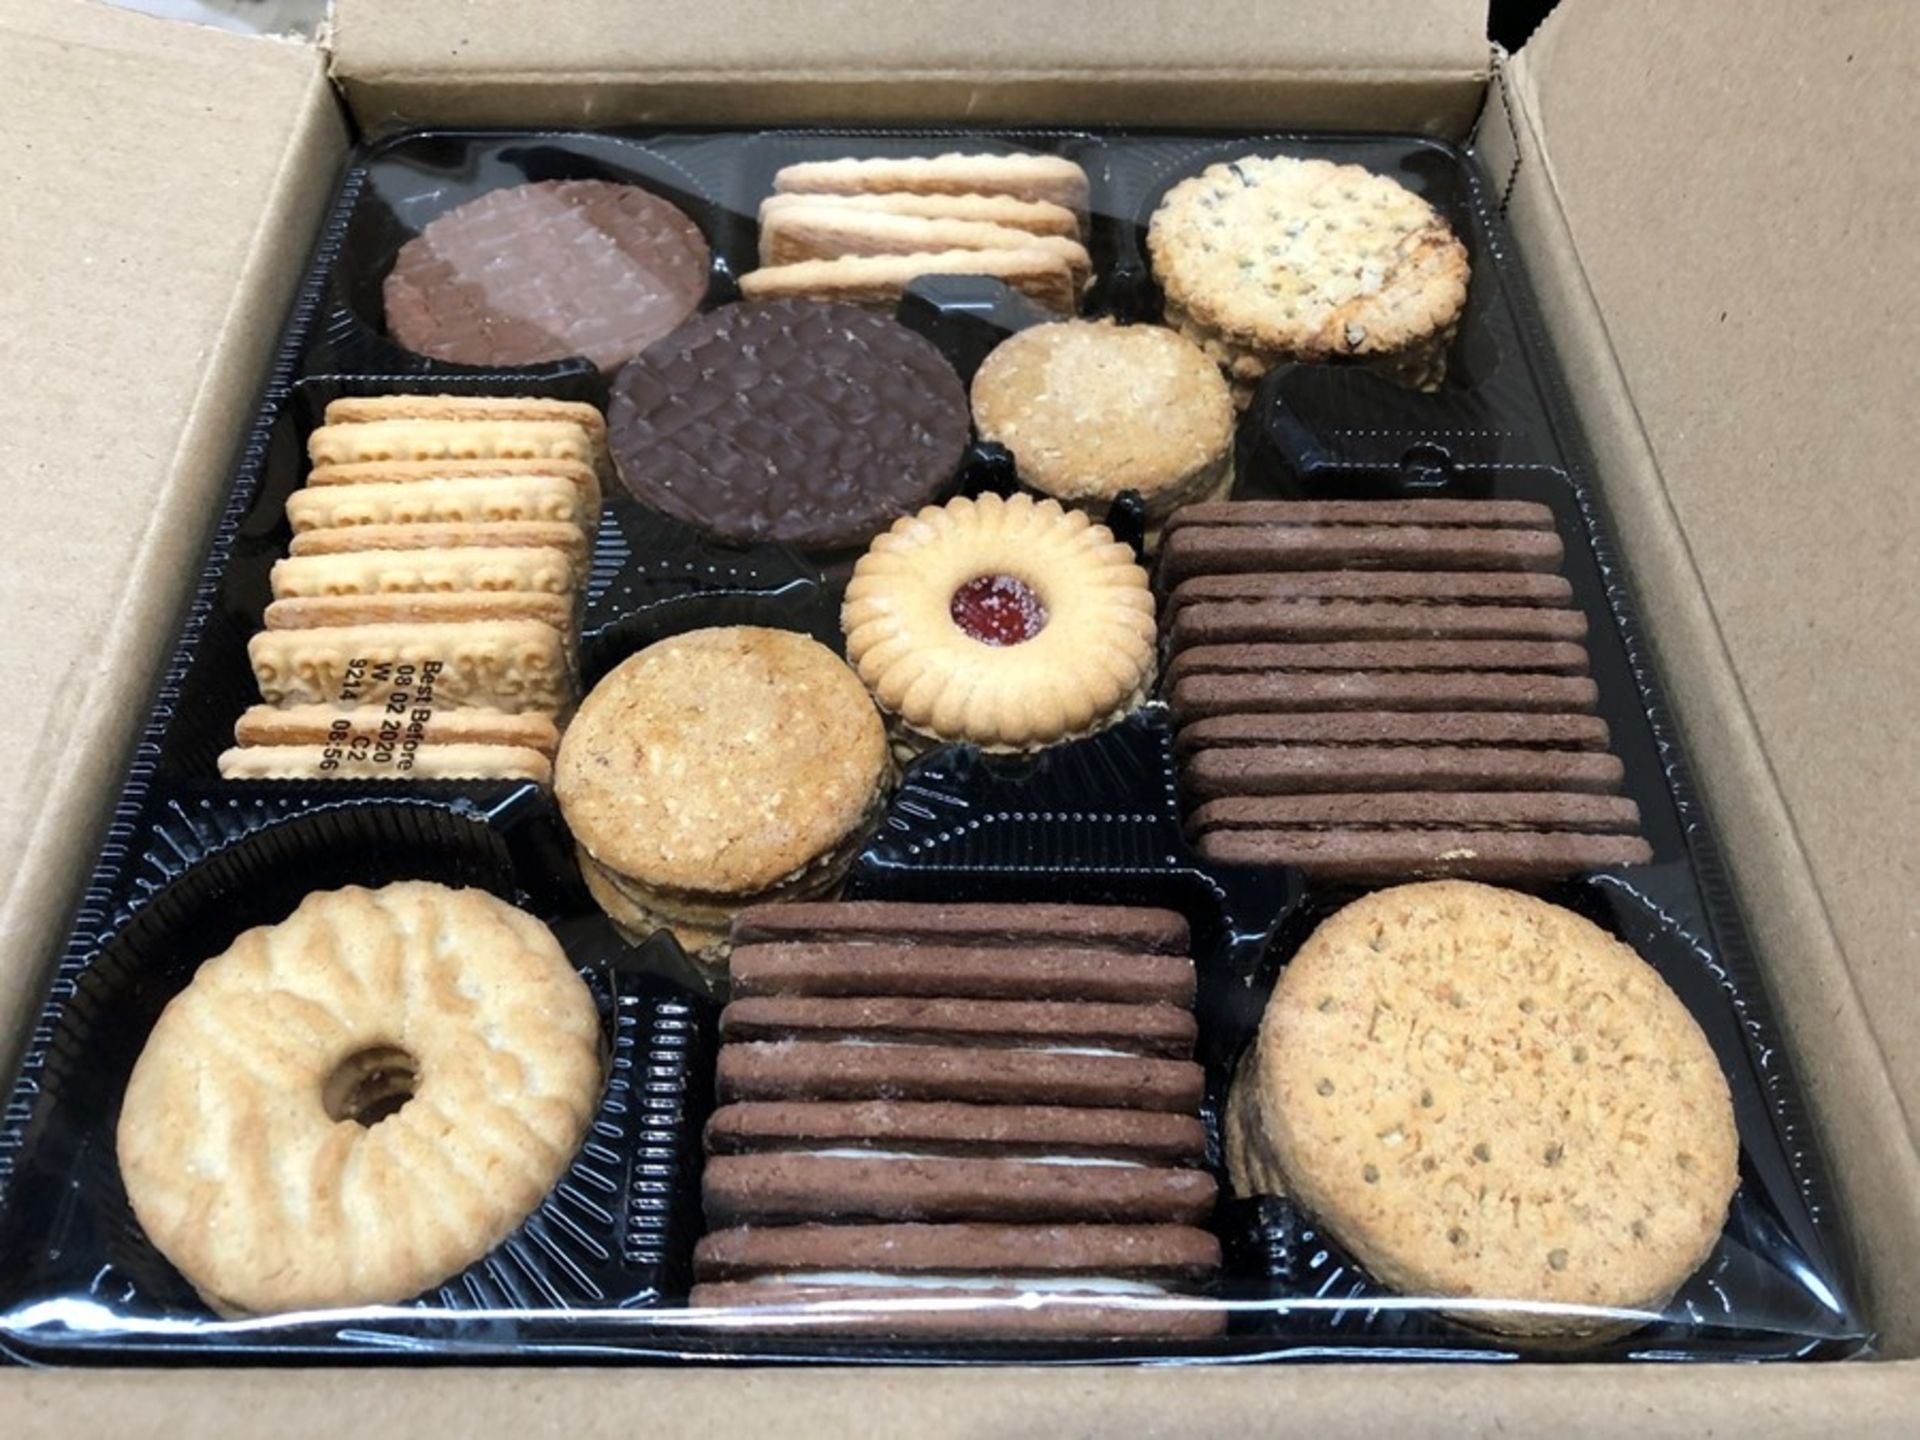 1 LOT TO CONTAIN 2 BOXES OF CRAWFORD ROVER BISCUIT TRAYS - 4 TRAYS PER BOX / BEST BEFORE: 08/02/2020